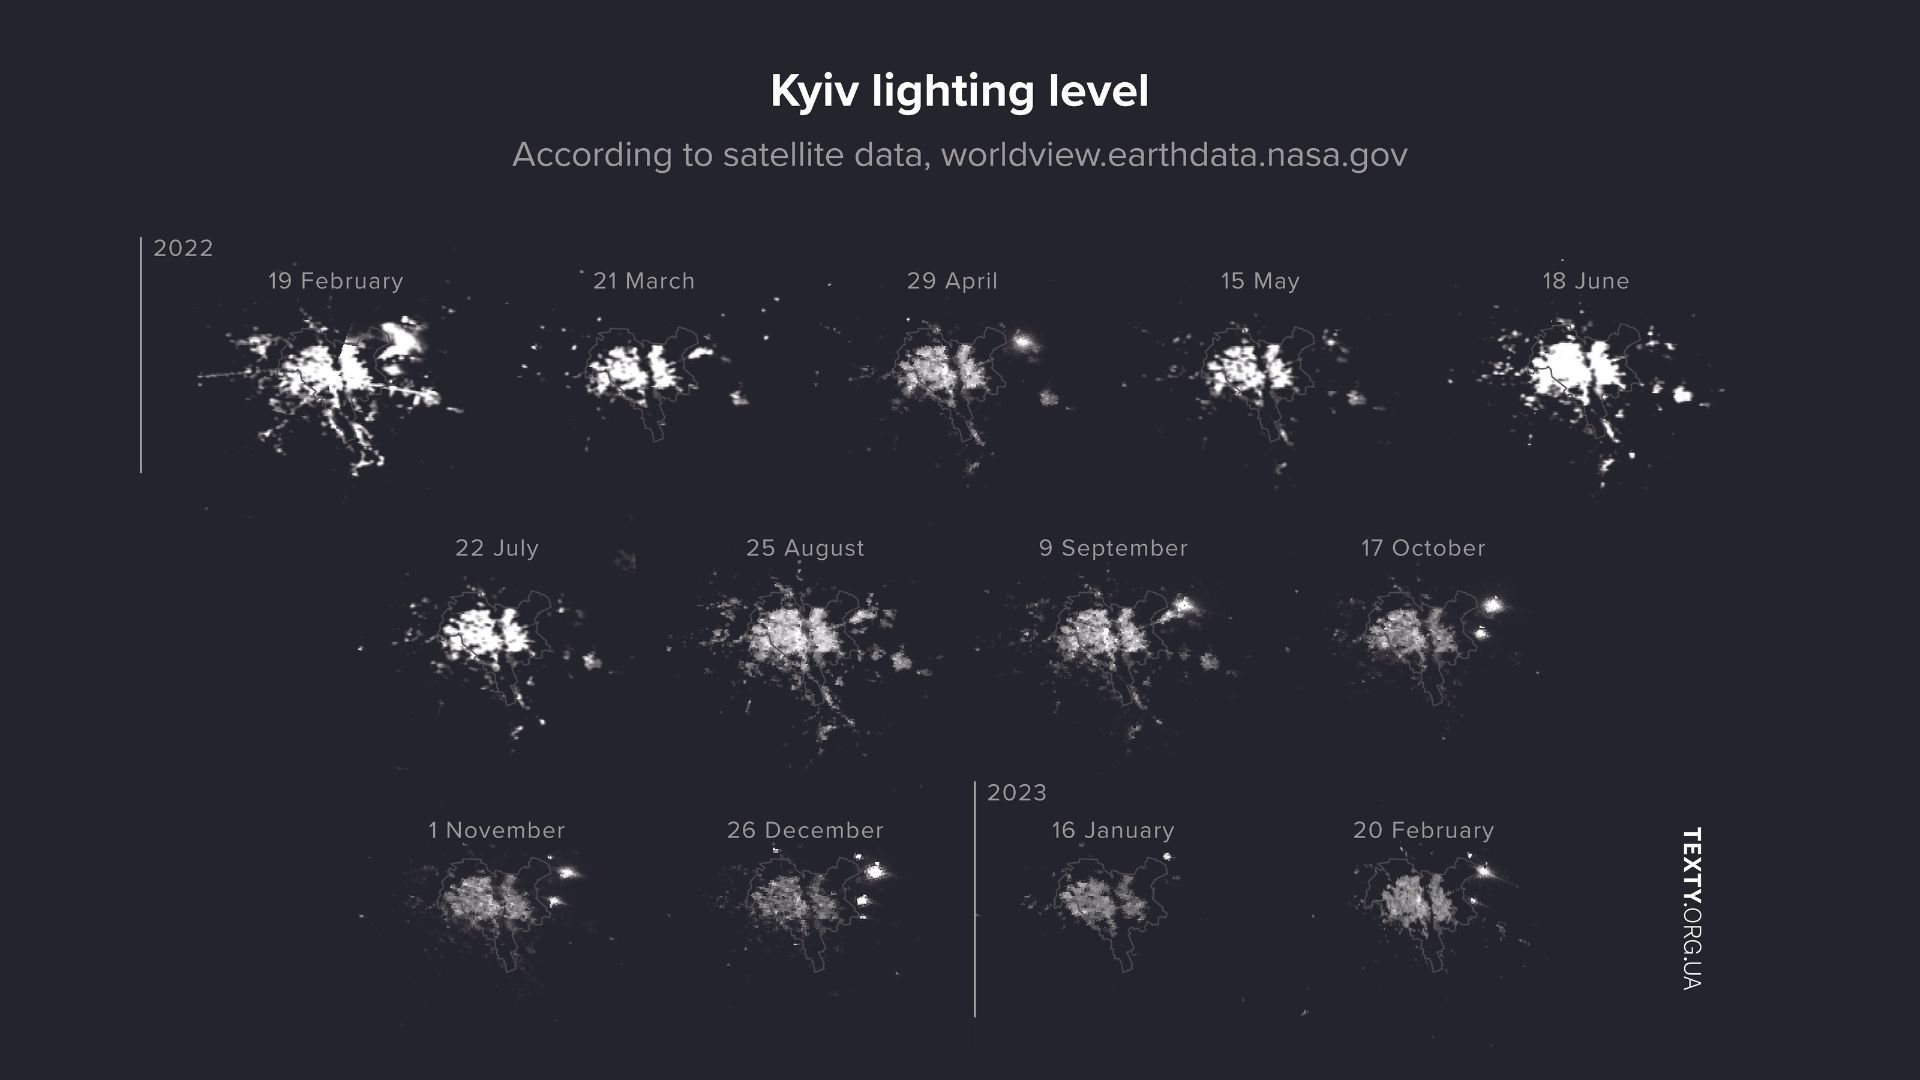 The effect is especially good seen in spring 2022 on the light pollution maps of  Kyiv.